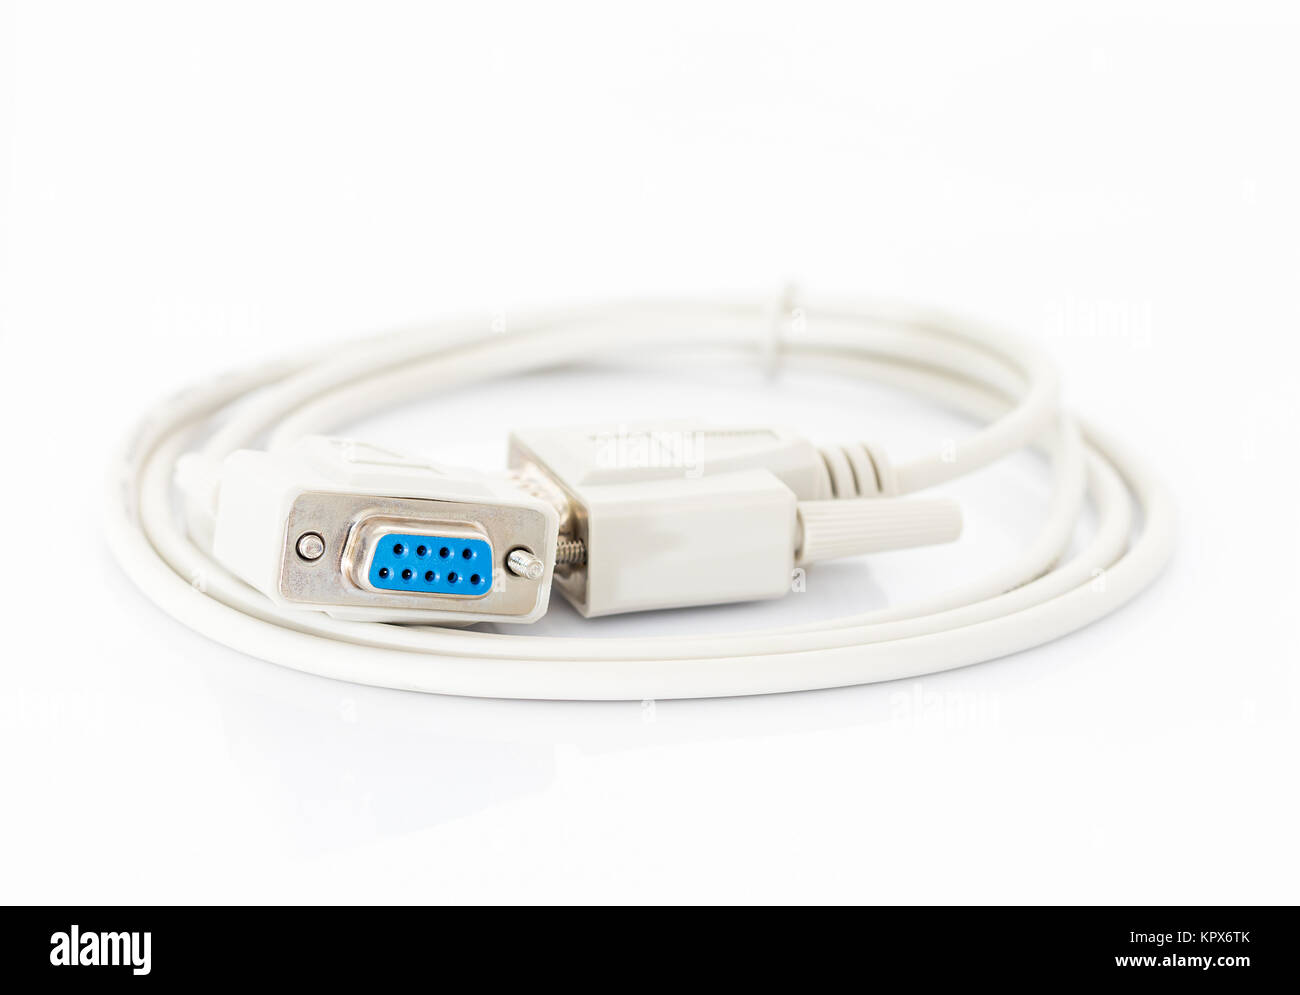 VGA cables connector with white cord Stock Photo